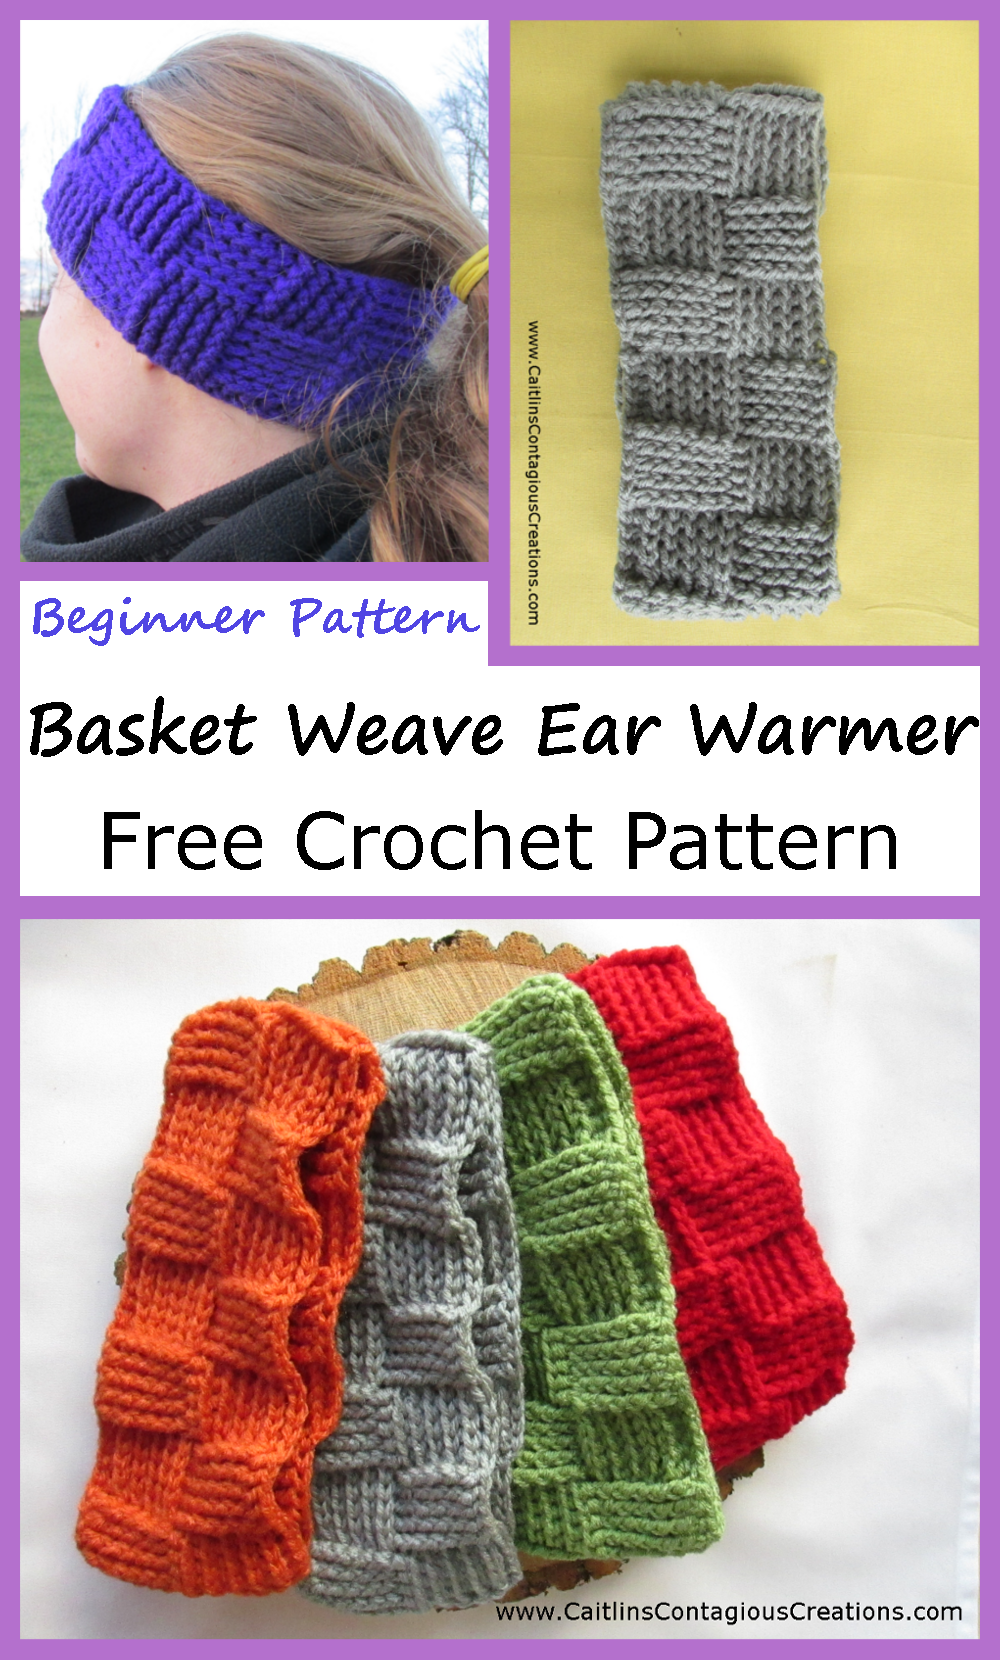 Basket Weave Ear Warmer crochet pattern is a free crochet design. A hat alternative, this pattern is perfect for outdoor winter activities. It is a fun pattern that works up quick and is easy for every skill level! Give it a try today!